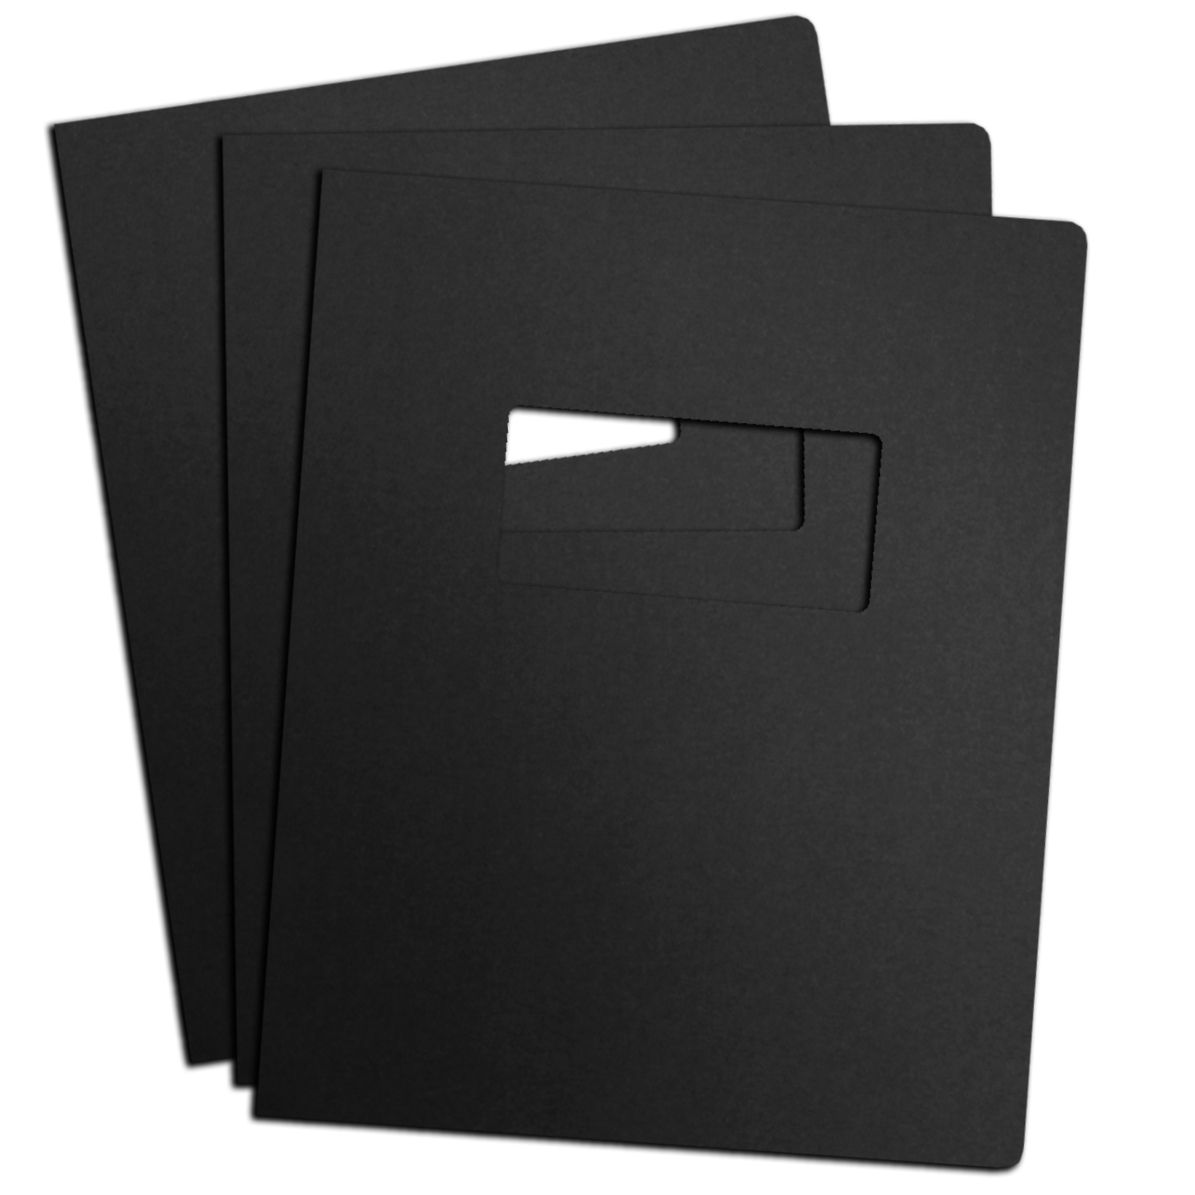 204 Linen Cover [w/ Window, Square Corner, Black, Unpunched, 8-1/2" X 11"] 100 /Pack